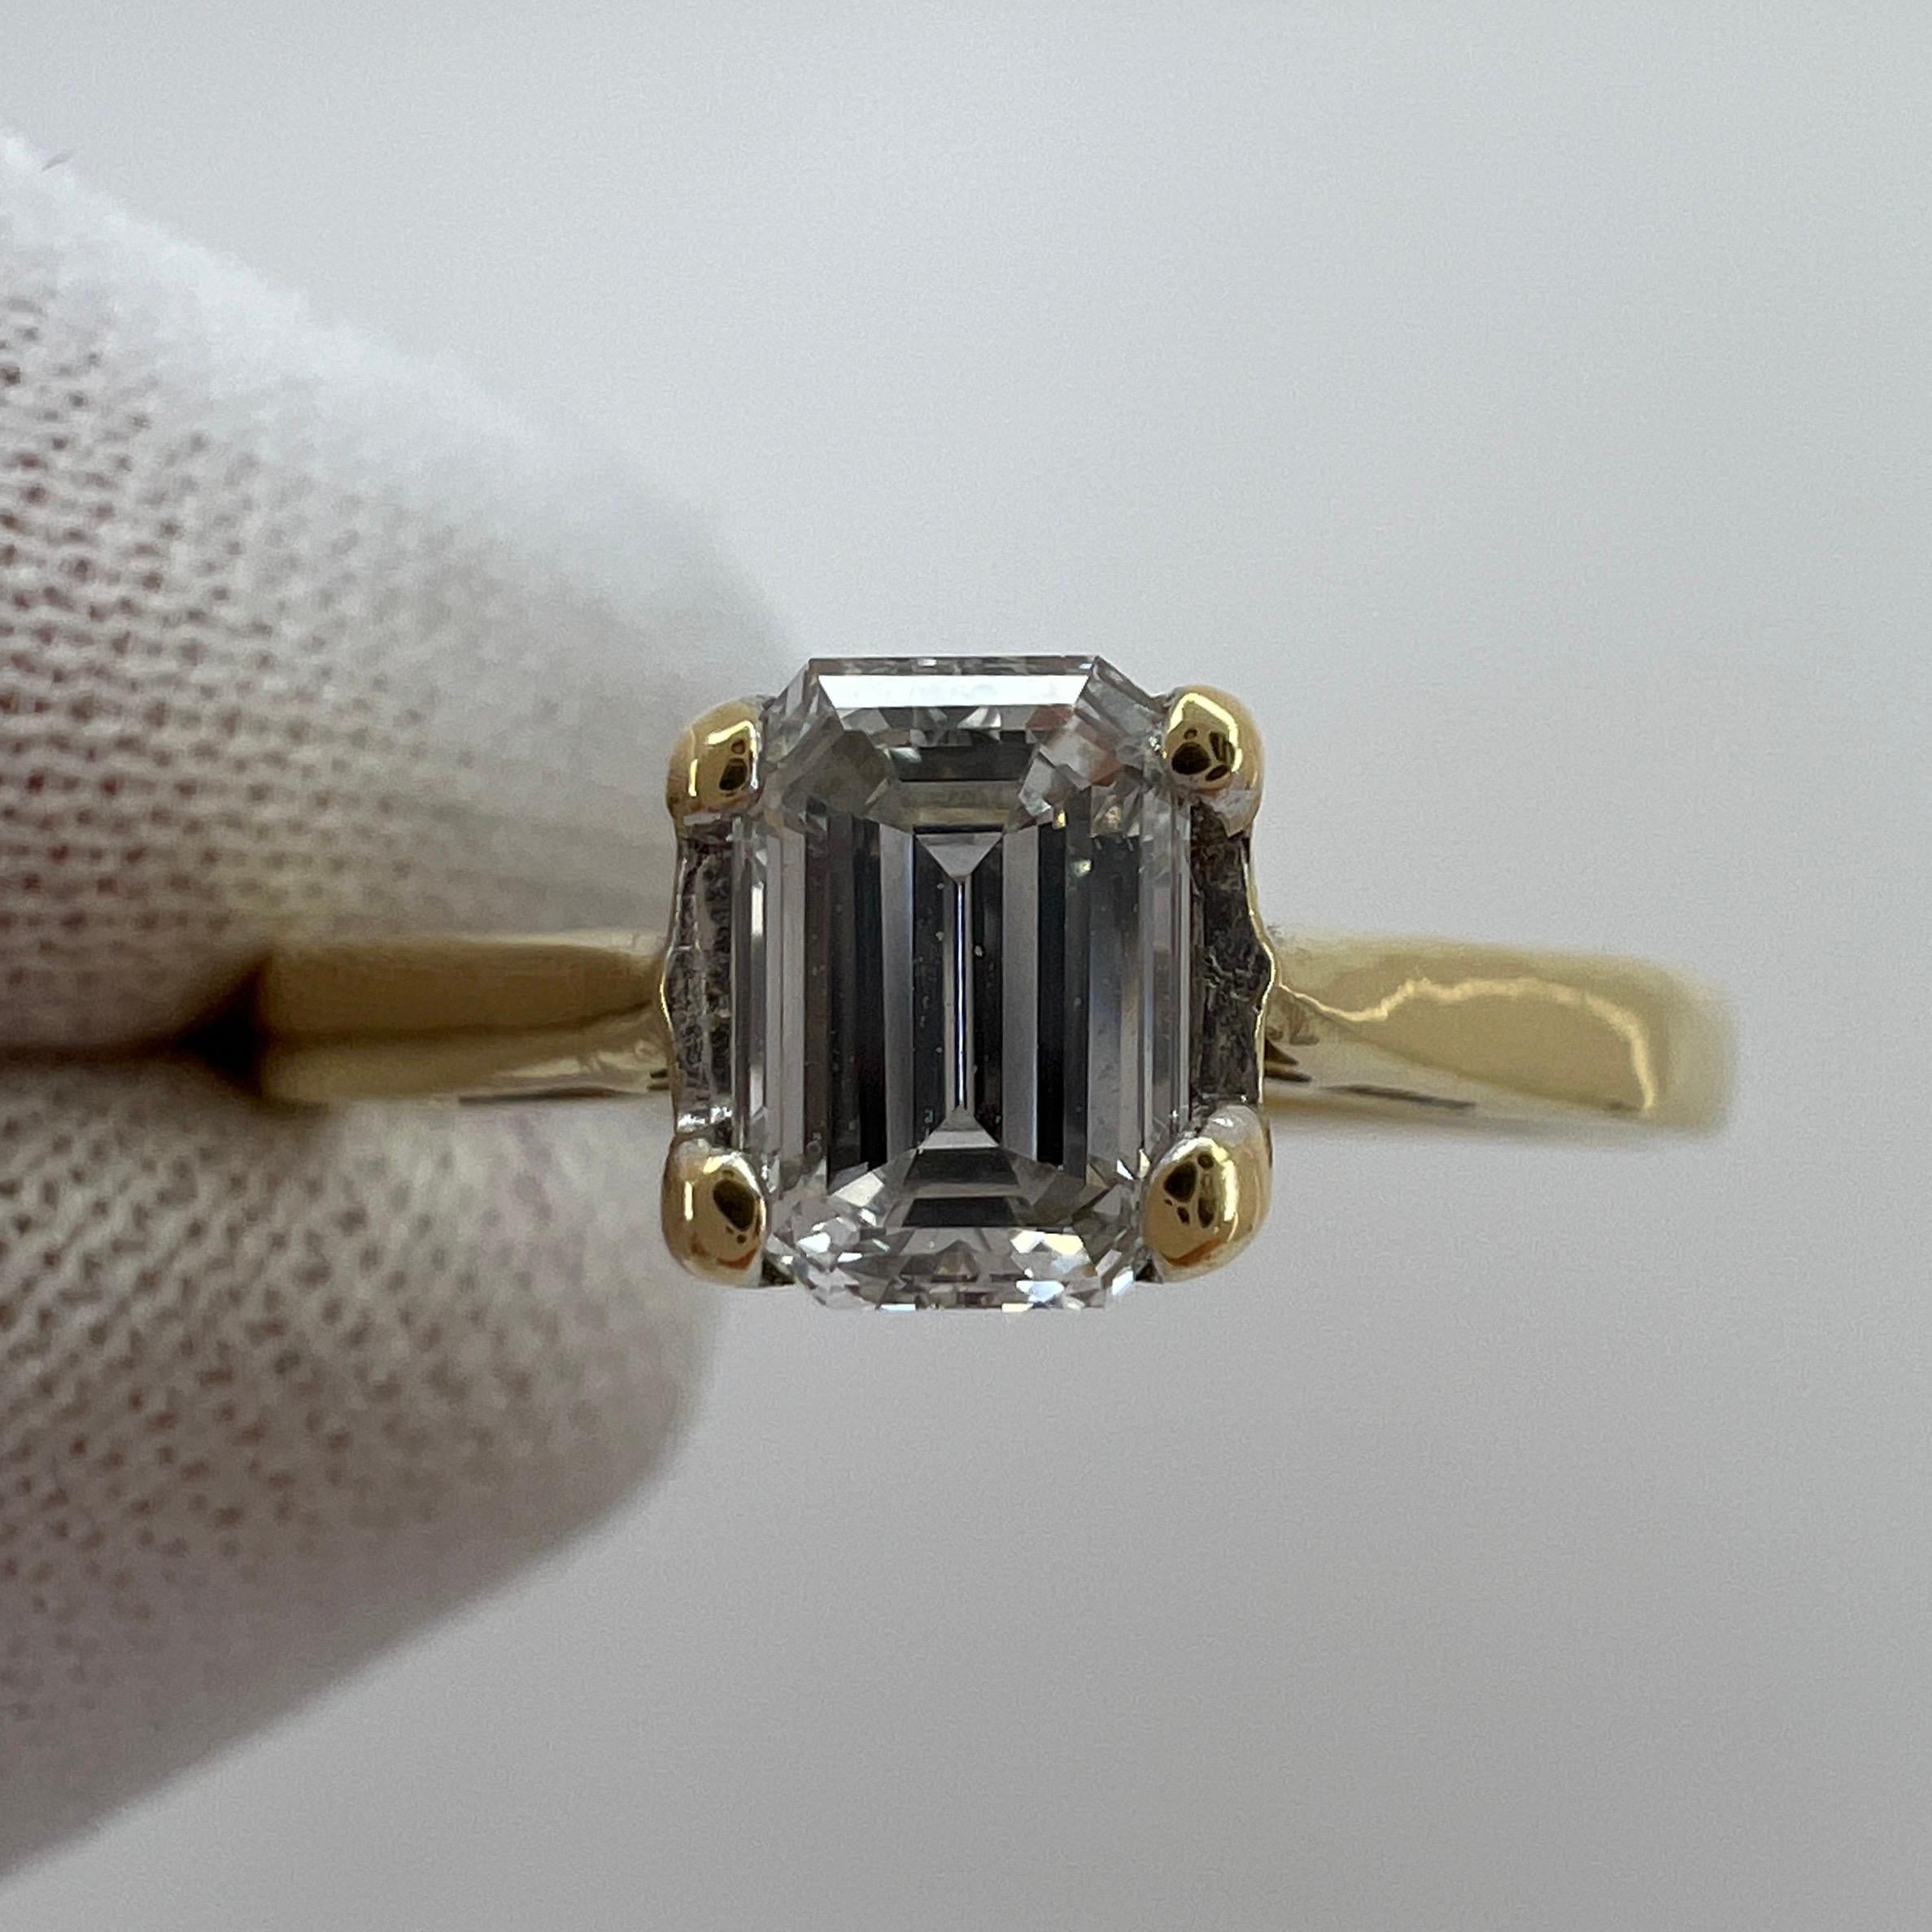 Fine Emerald Cut Diamond Yellow & White Solitaire Ring.

0.51 carat diamond , accompanied by GIA Diamond report. Confirming stone as F colour and SI2 clarity.
Has a very good emerald cut to show lots of light return and sparkle. 

Ring size L. US 6.